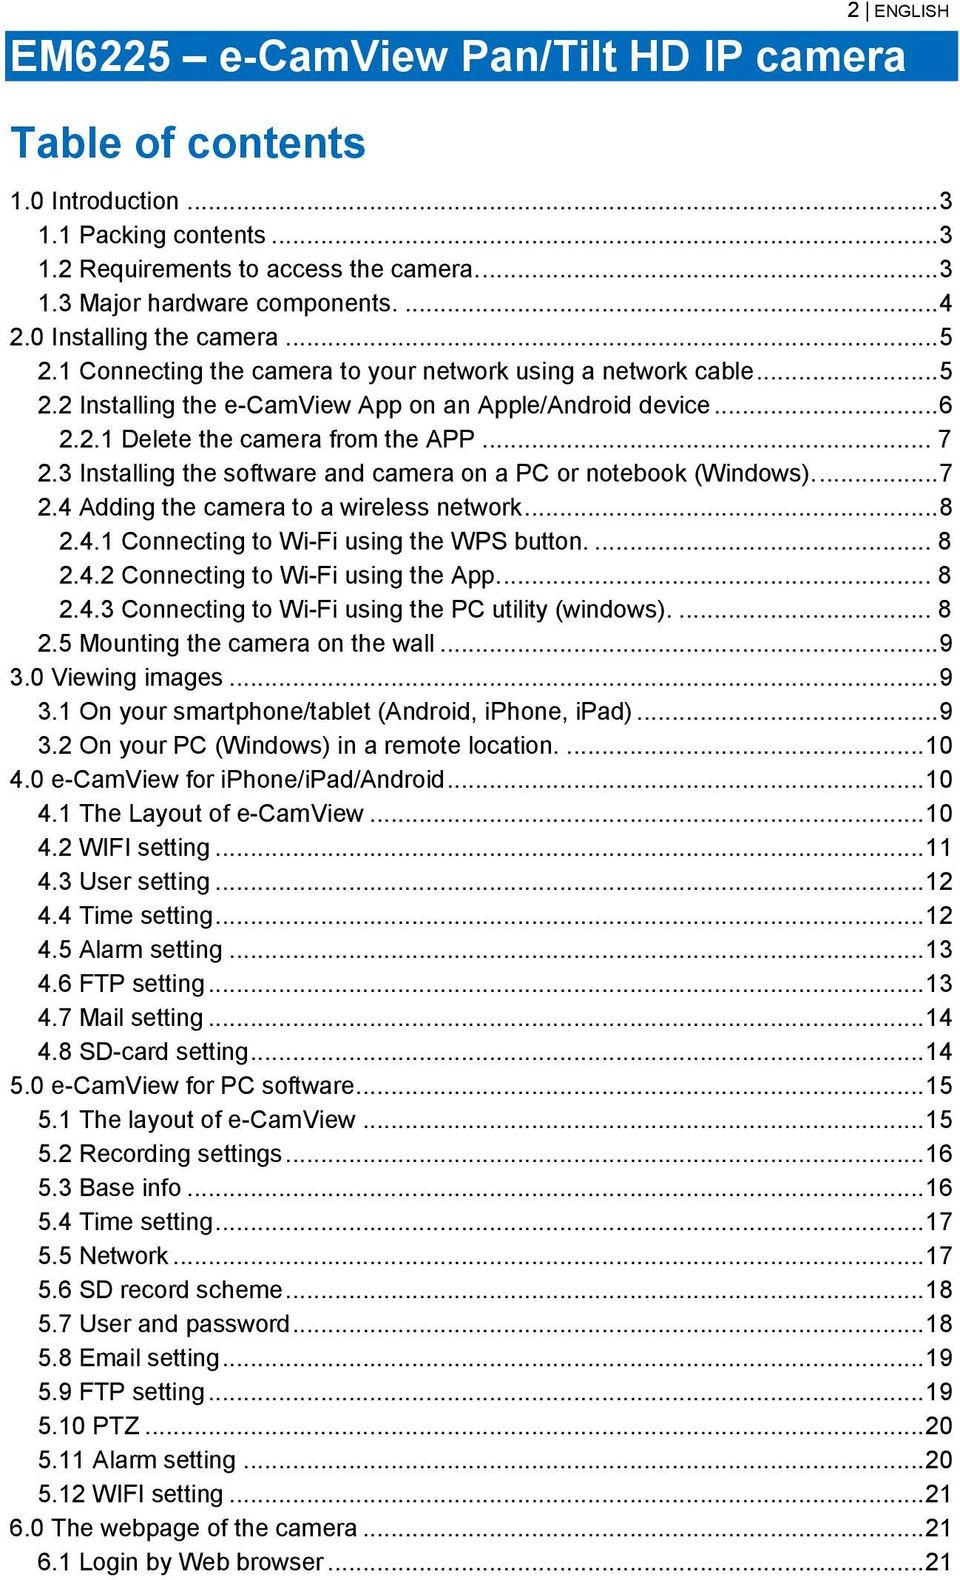 .. 7 2.3 Installing the software and camera on a PC or notebook (Windows).... 7 2.4 Adding the camera to a wireless network... 8 2.4.1 Connecting to Wi-Fi using the WPS button.... 8 2.4.2 Connecting to Wi-Fi using the App.